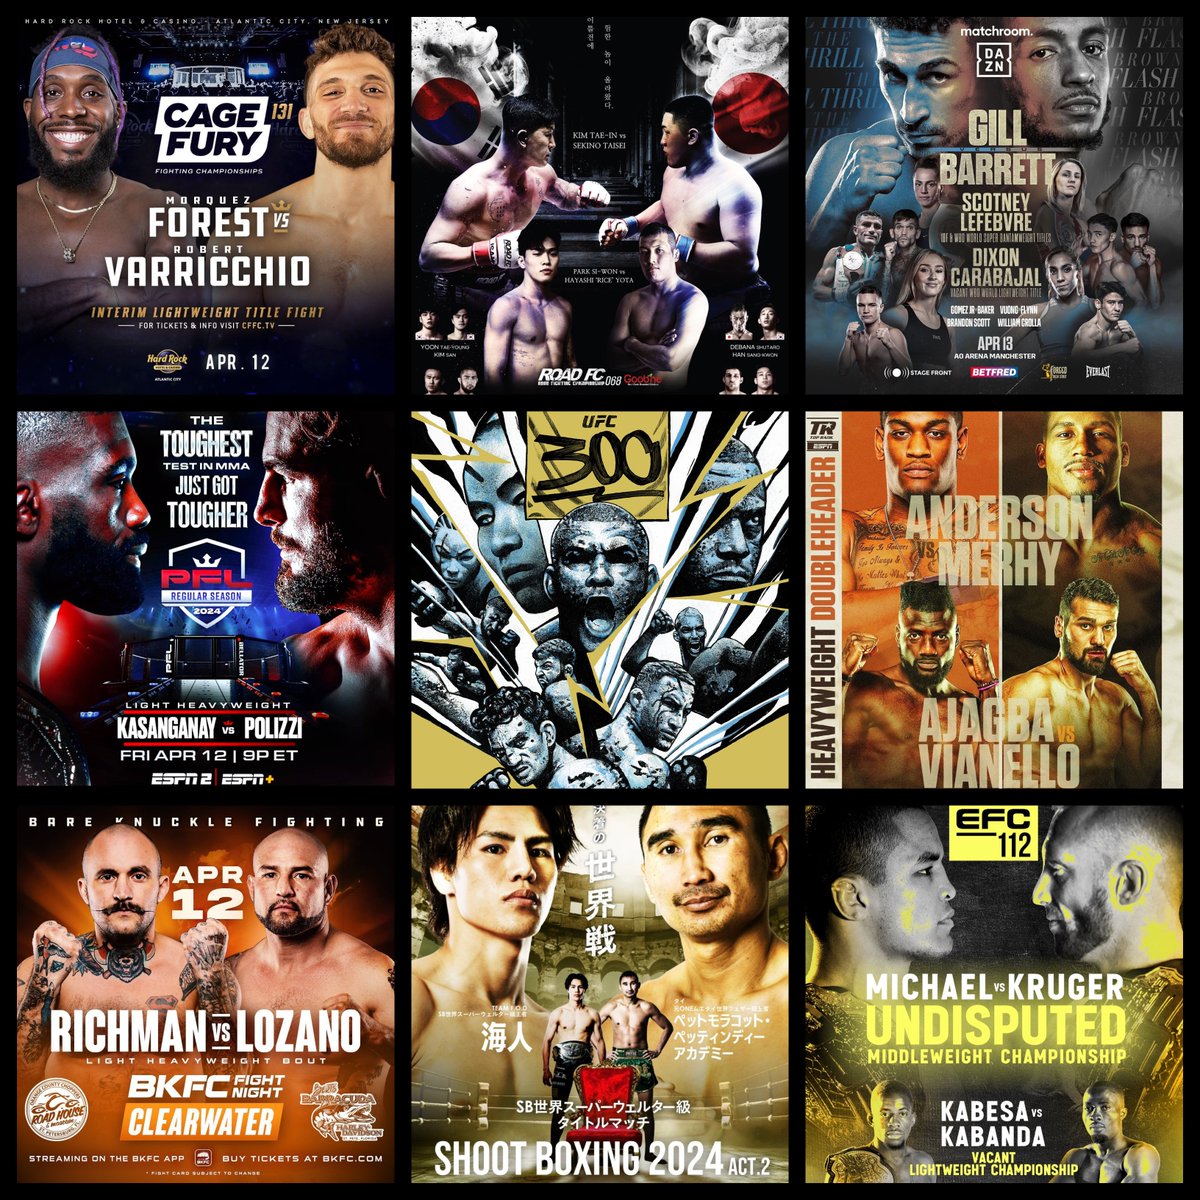 Live Combat Sport Schedule: 4/10 -  4/14

Complete schedule w/ fight cards, PPV & free live streams HERE:
▶️grabakahitman.com/2024/04/09/liv…

#UFC300 #PFLRegularSeason #AndersonMerhy #ShootBoxing #EFC112 #CFFC131 #BKFCClearwater #ROADFC68 #GillBarrett #BSC21 #OpenFC41 #SFT47 #RWSjapan